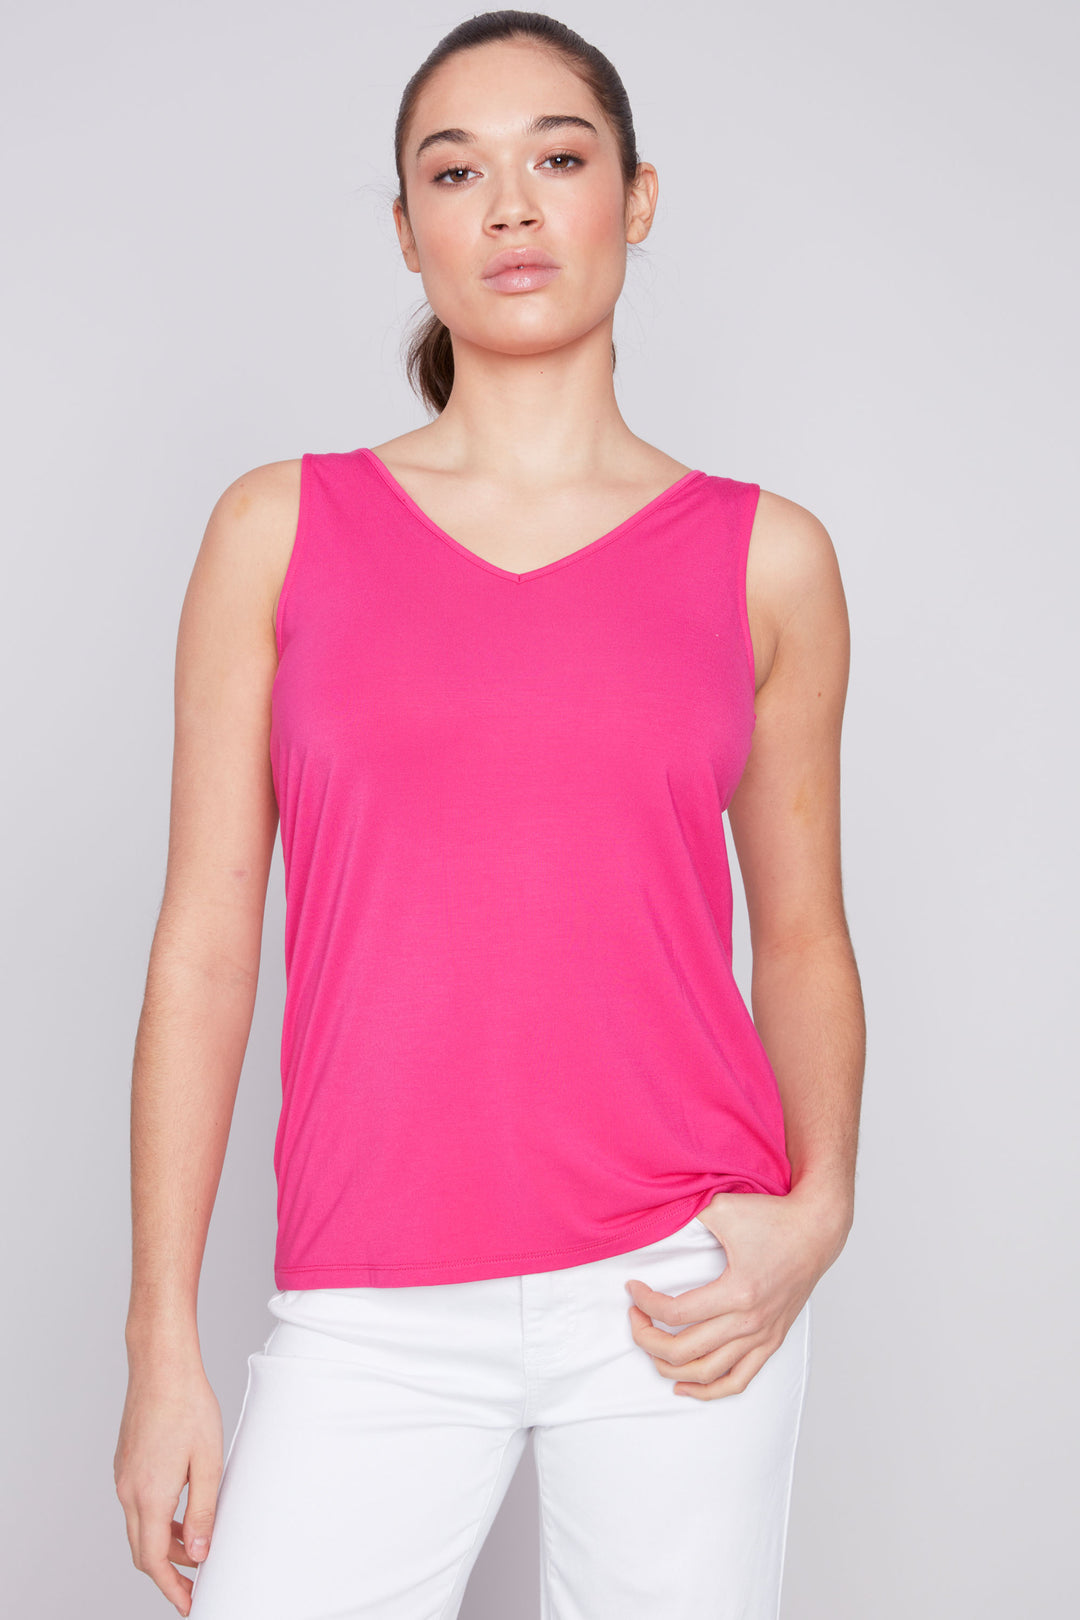 Featuring a flattering v-neck and a light, simple design, this top is perfect for any occasion. 